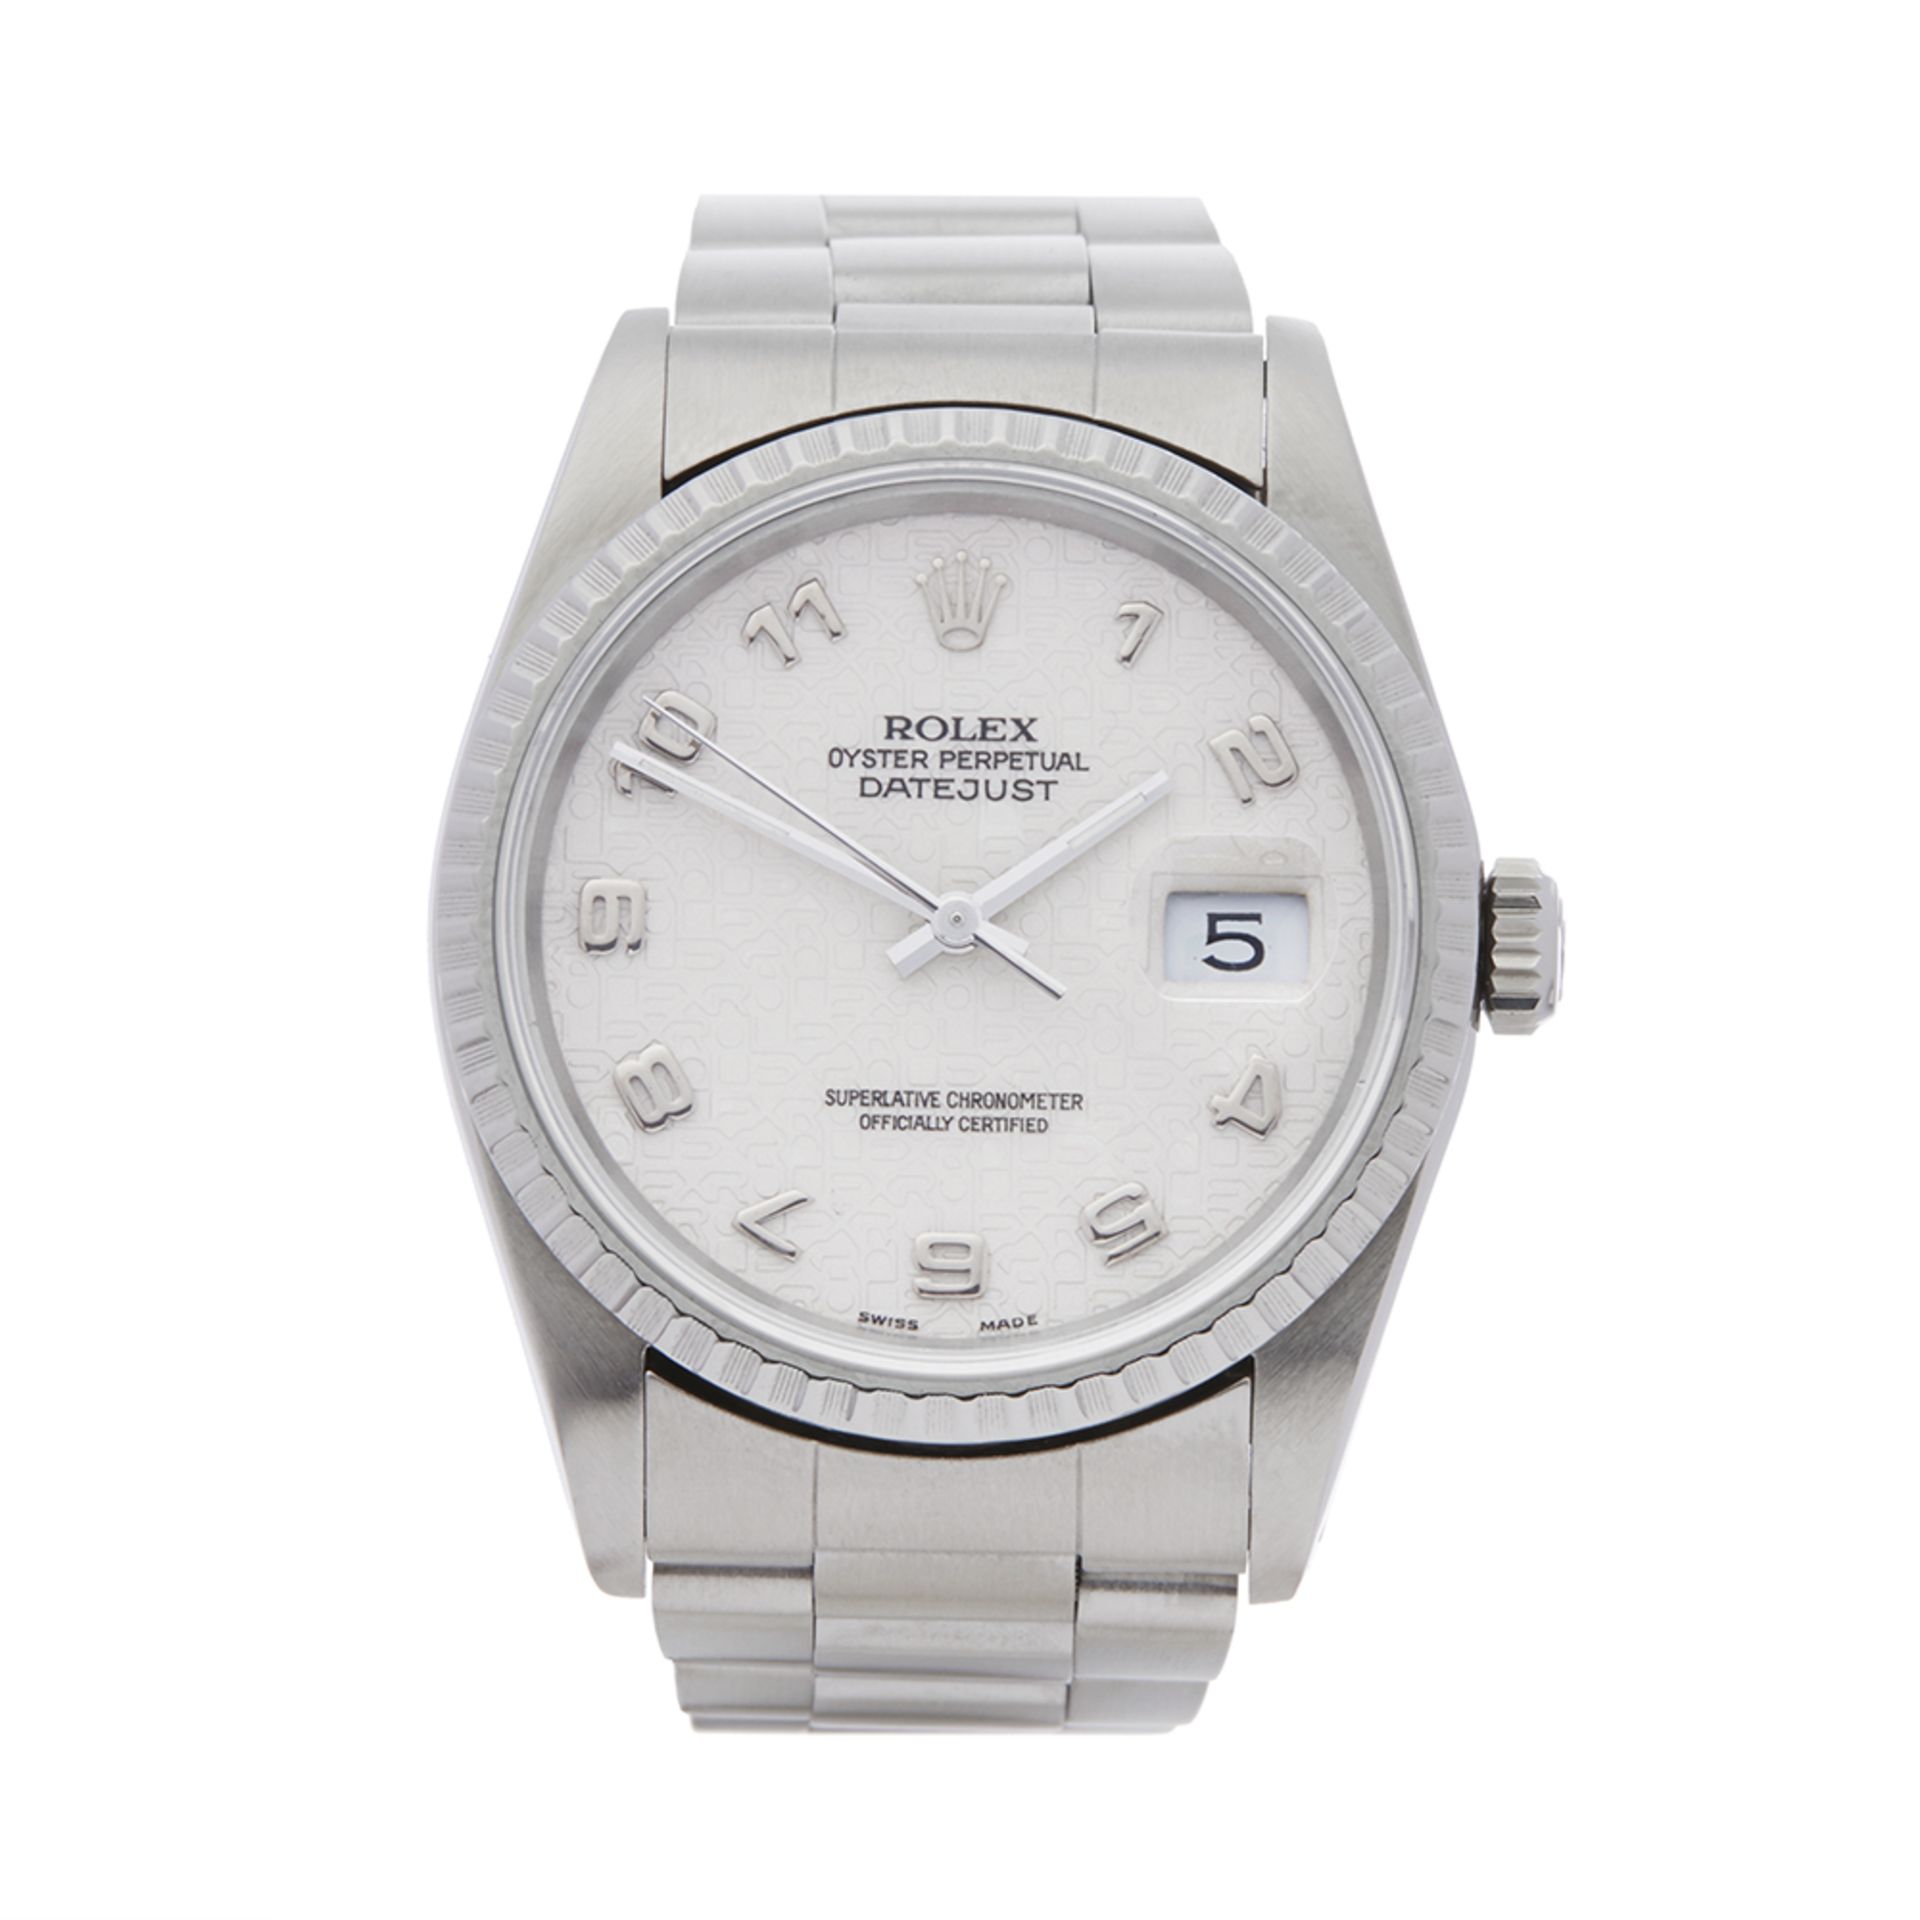 Rolex Datejust 36mm Stainless Steel - 16220 £450 recent service carried out. - Image 2 of 7